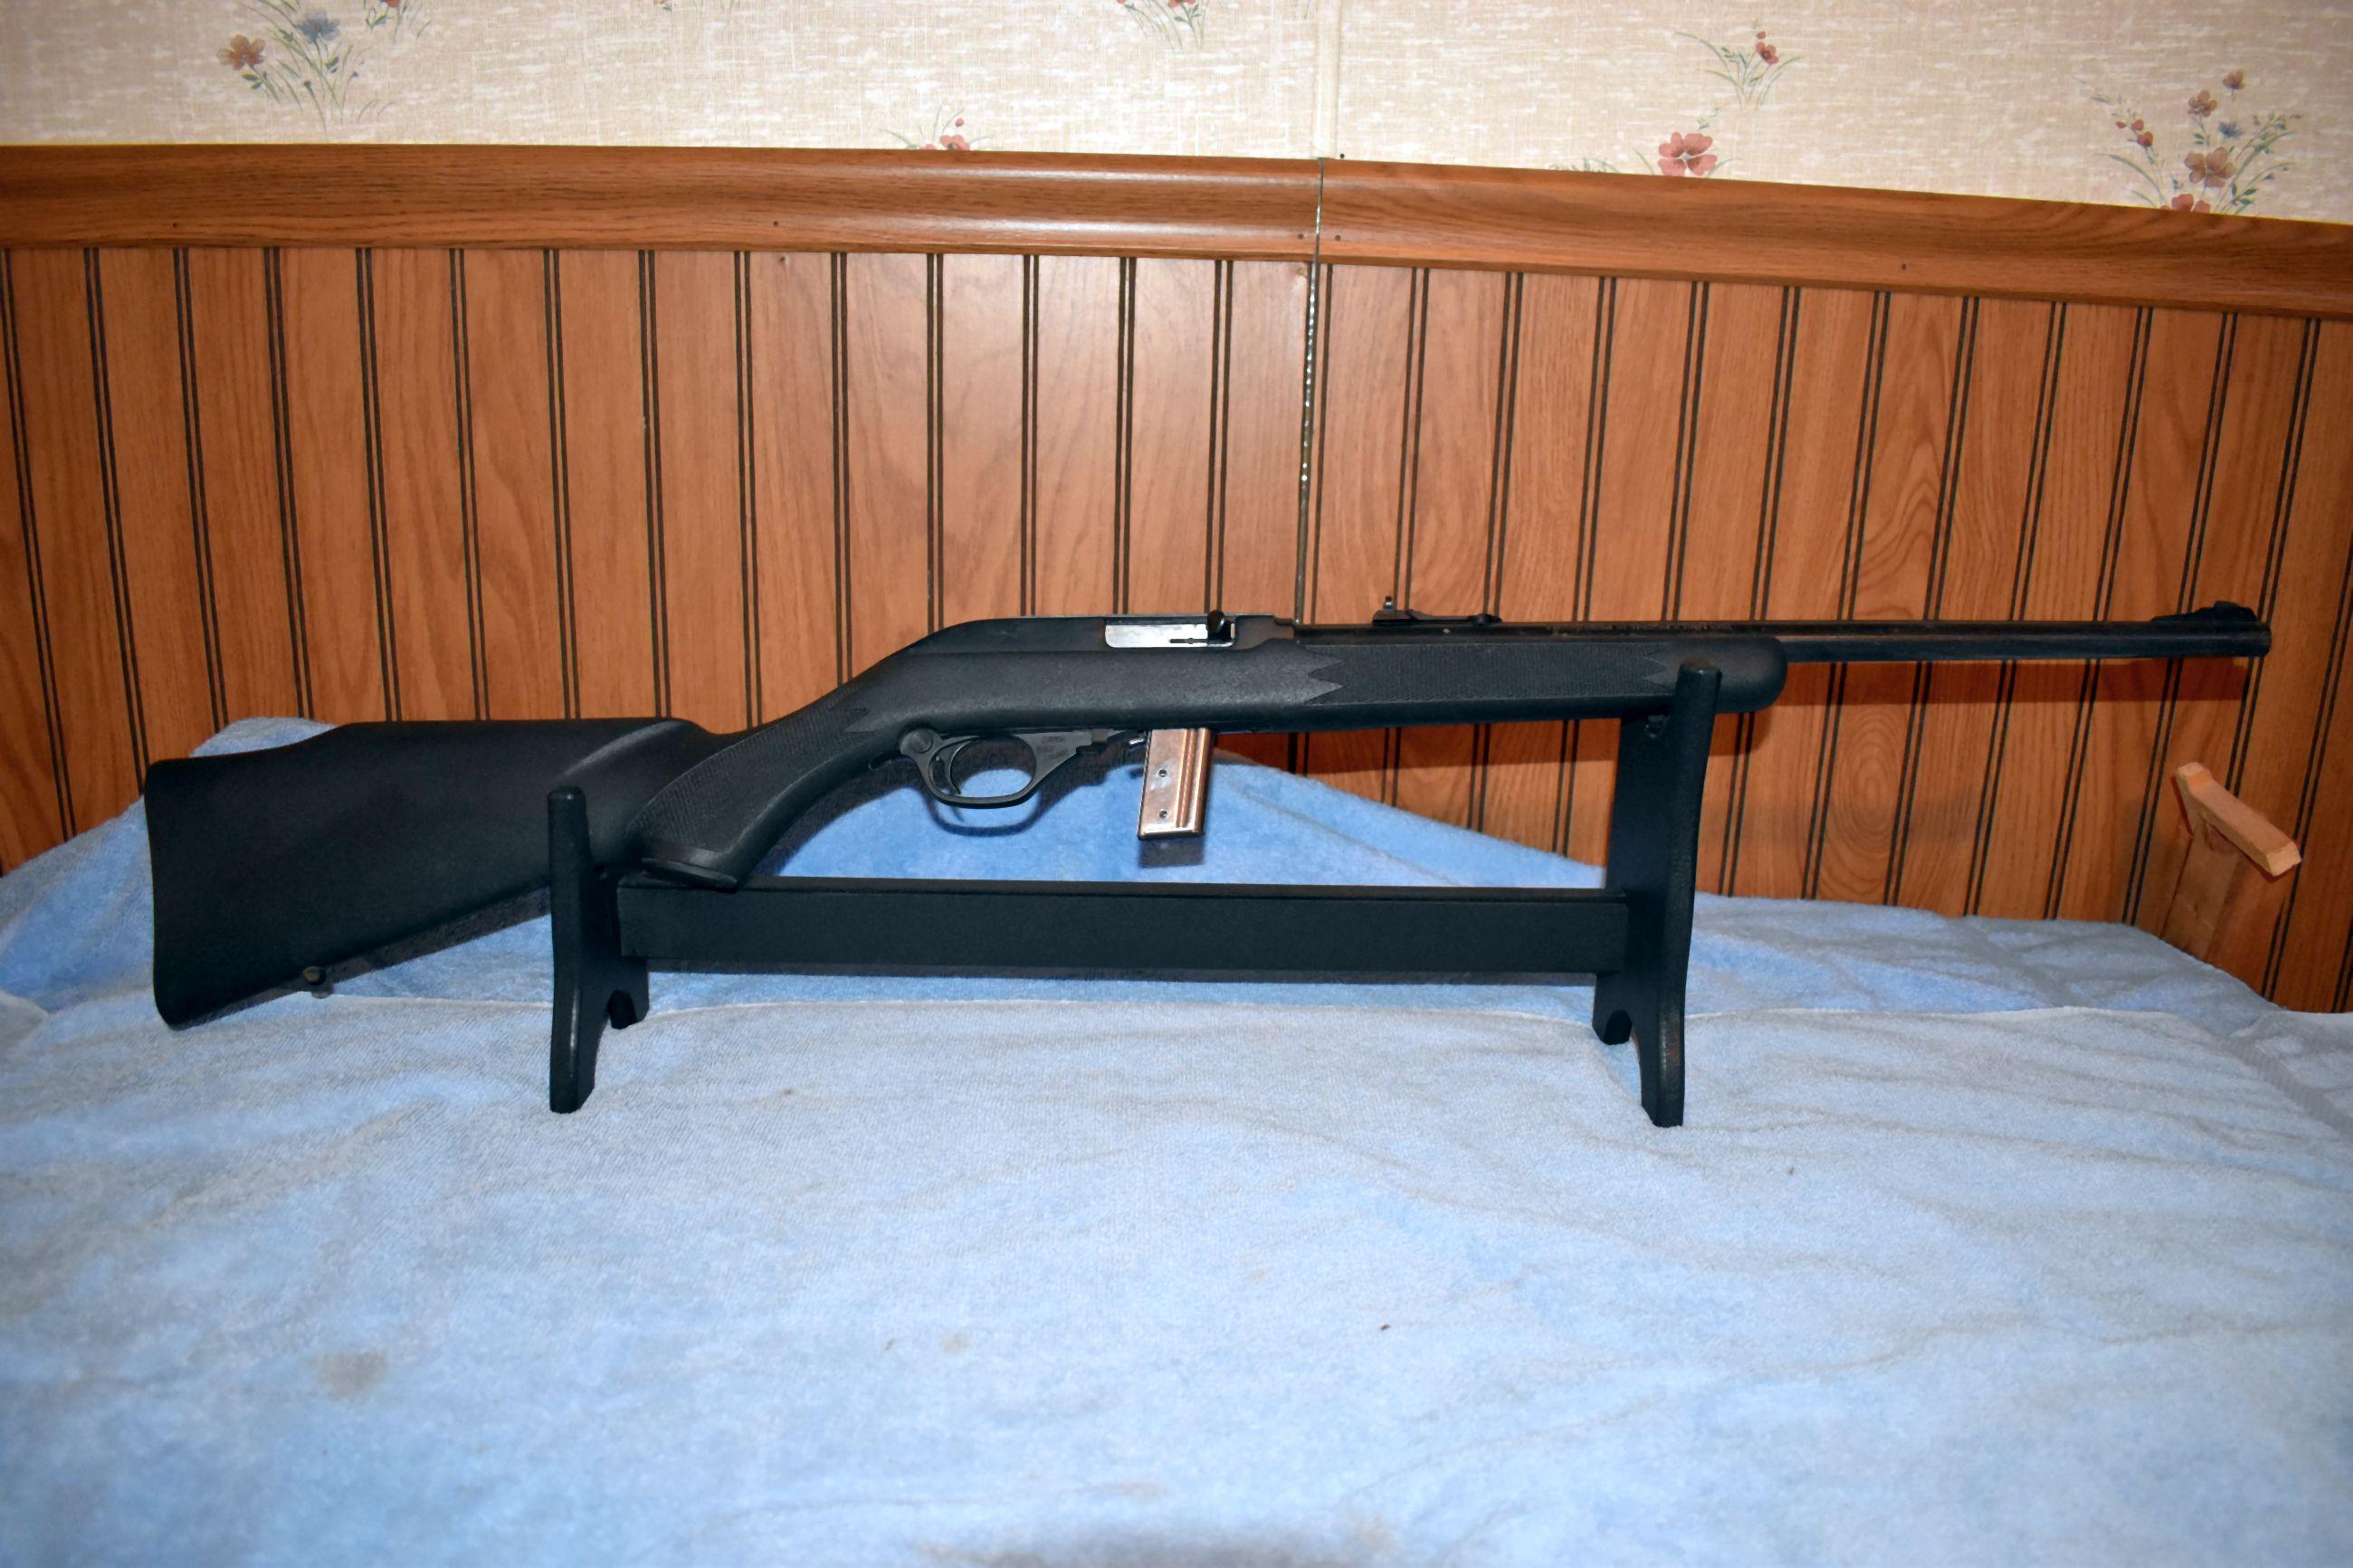 Marlin Model 795, .22 LR Only, Micro Grooved Barrel, Semi Automatic, Magazine, SN:01144600